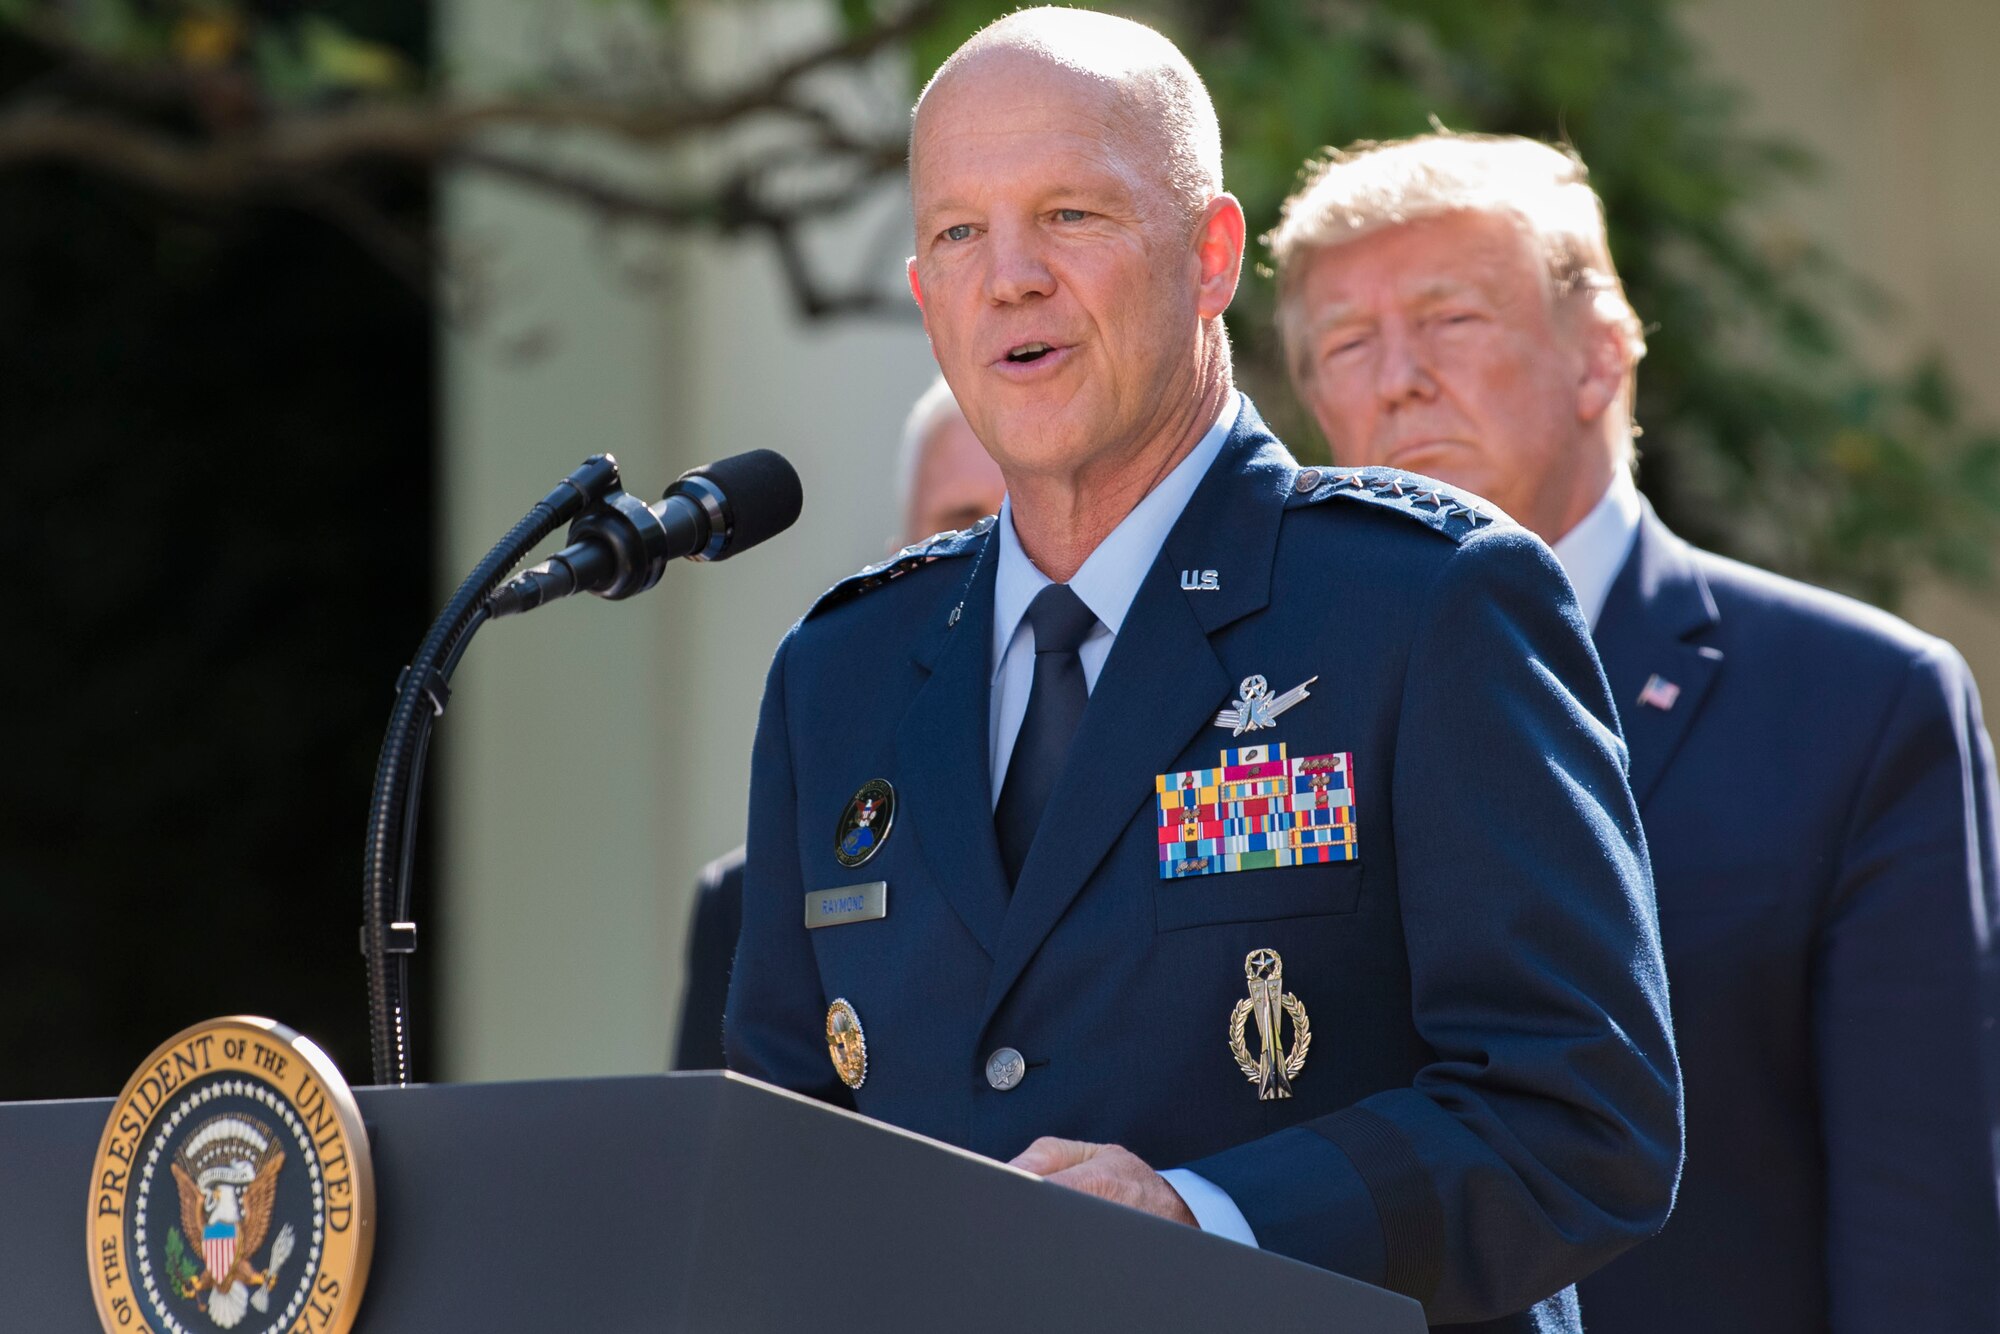 The incoming commander of U.S. Space Command, Air Force Gen. John W. Raymond, speaks at the White House ceremony on the establishment of the U.S. Space Command, Washington, D.C., Aug. 29, 2019.